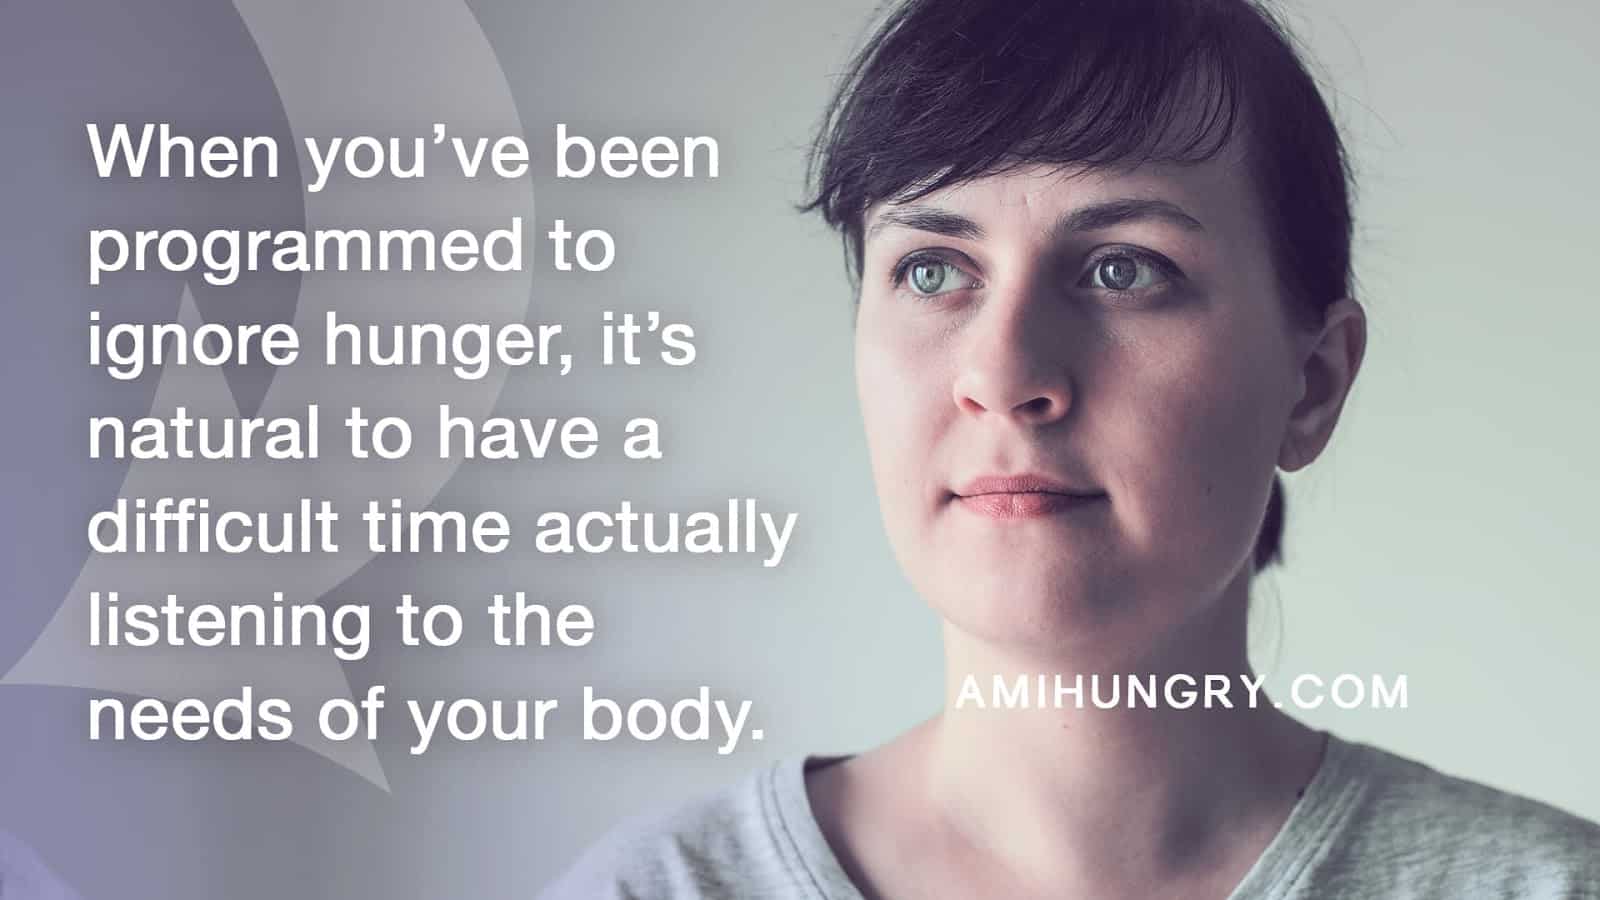 Quote — I can't tell if I'm hungry! When you’ve been programmed to ignore hunger, it’s natural to have difficulty listening to the needs of your body.